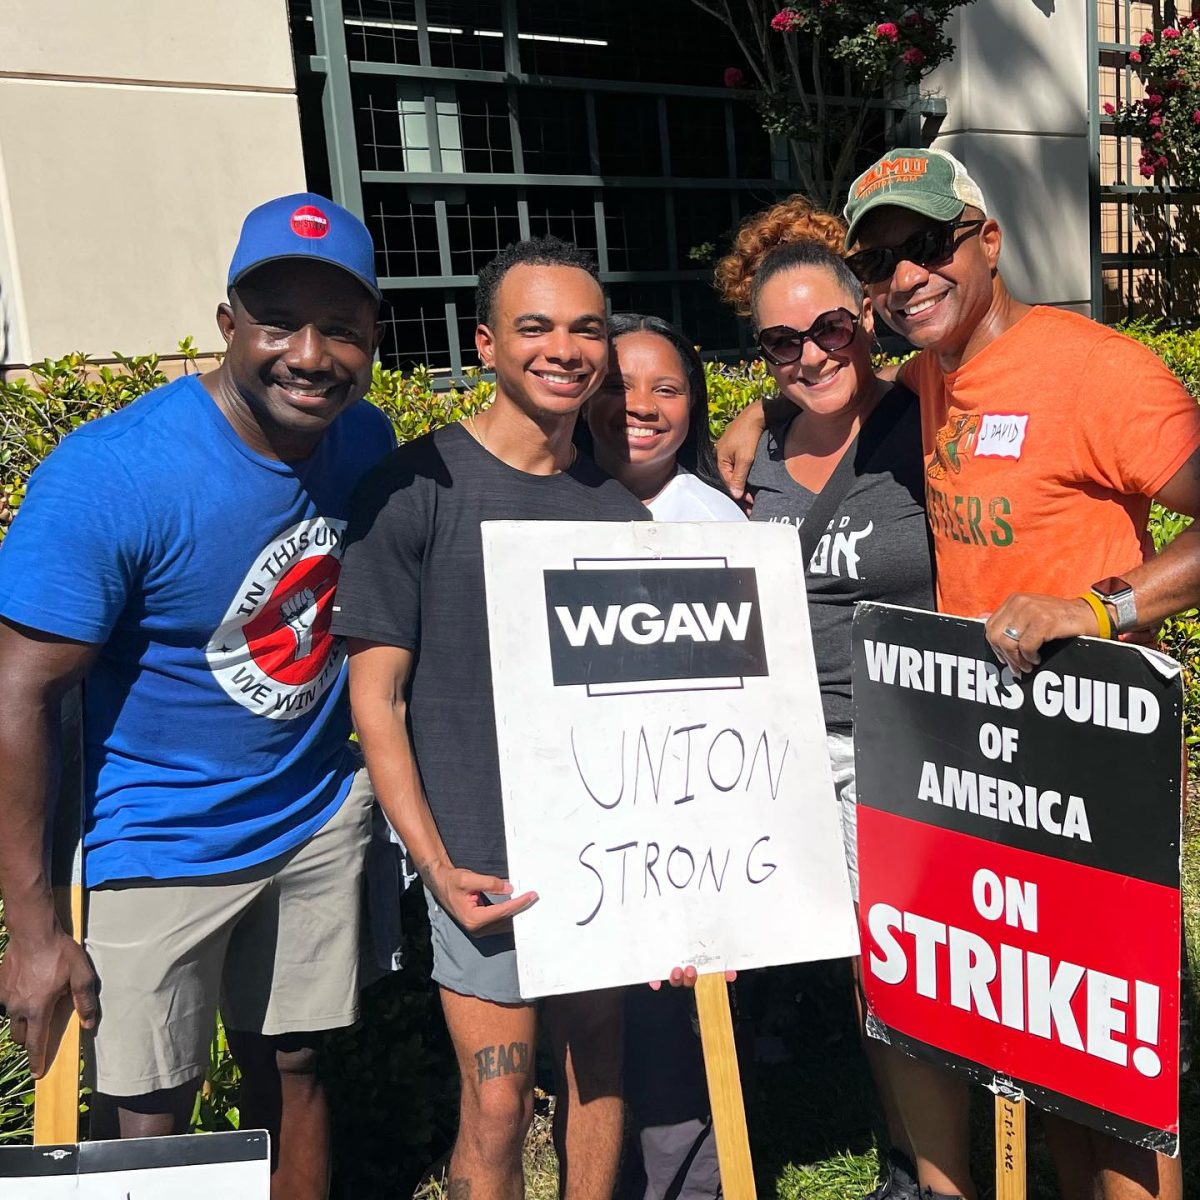 Marqui Jackson (left) pictured with WGA signs on August 31st (Marqui Jackson personal account on Facebook).